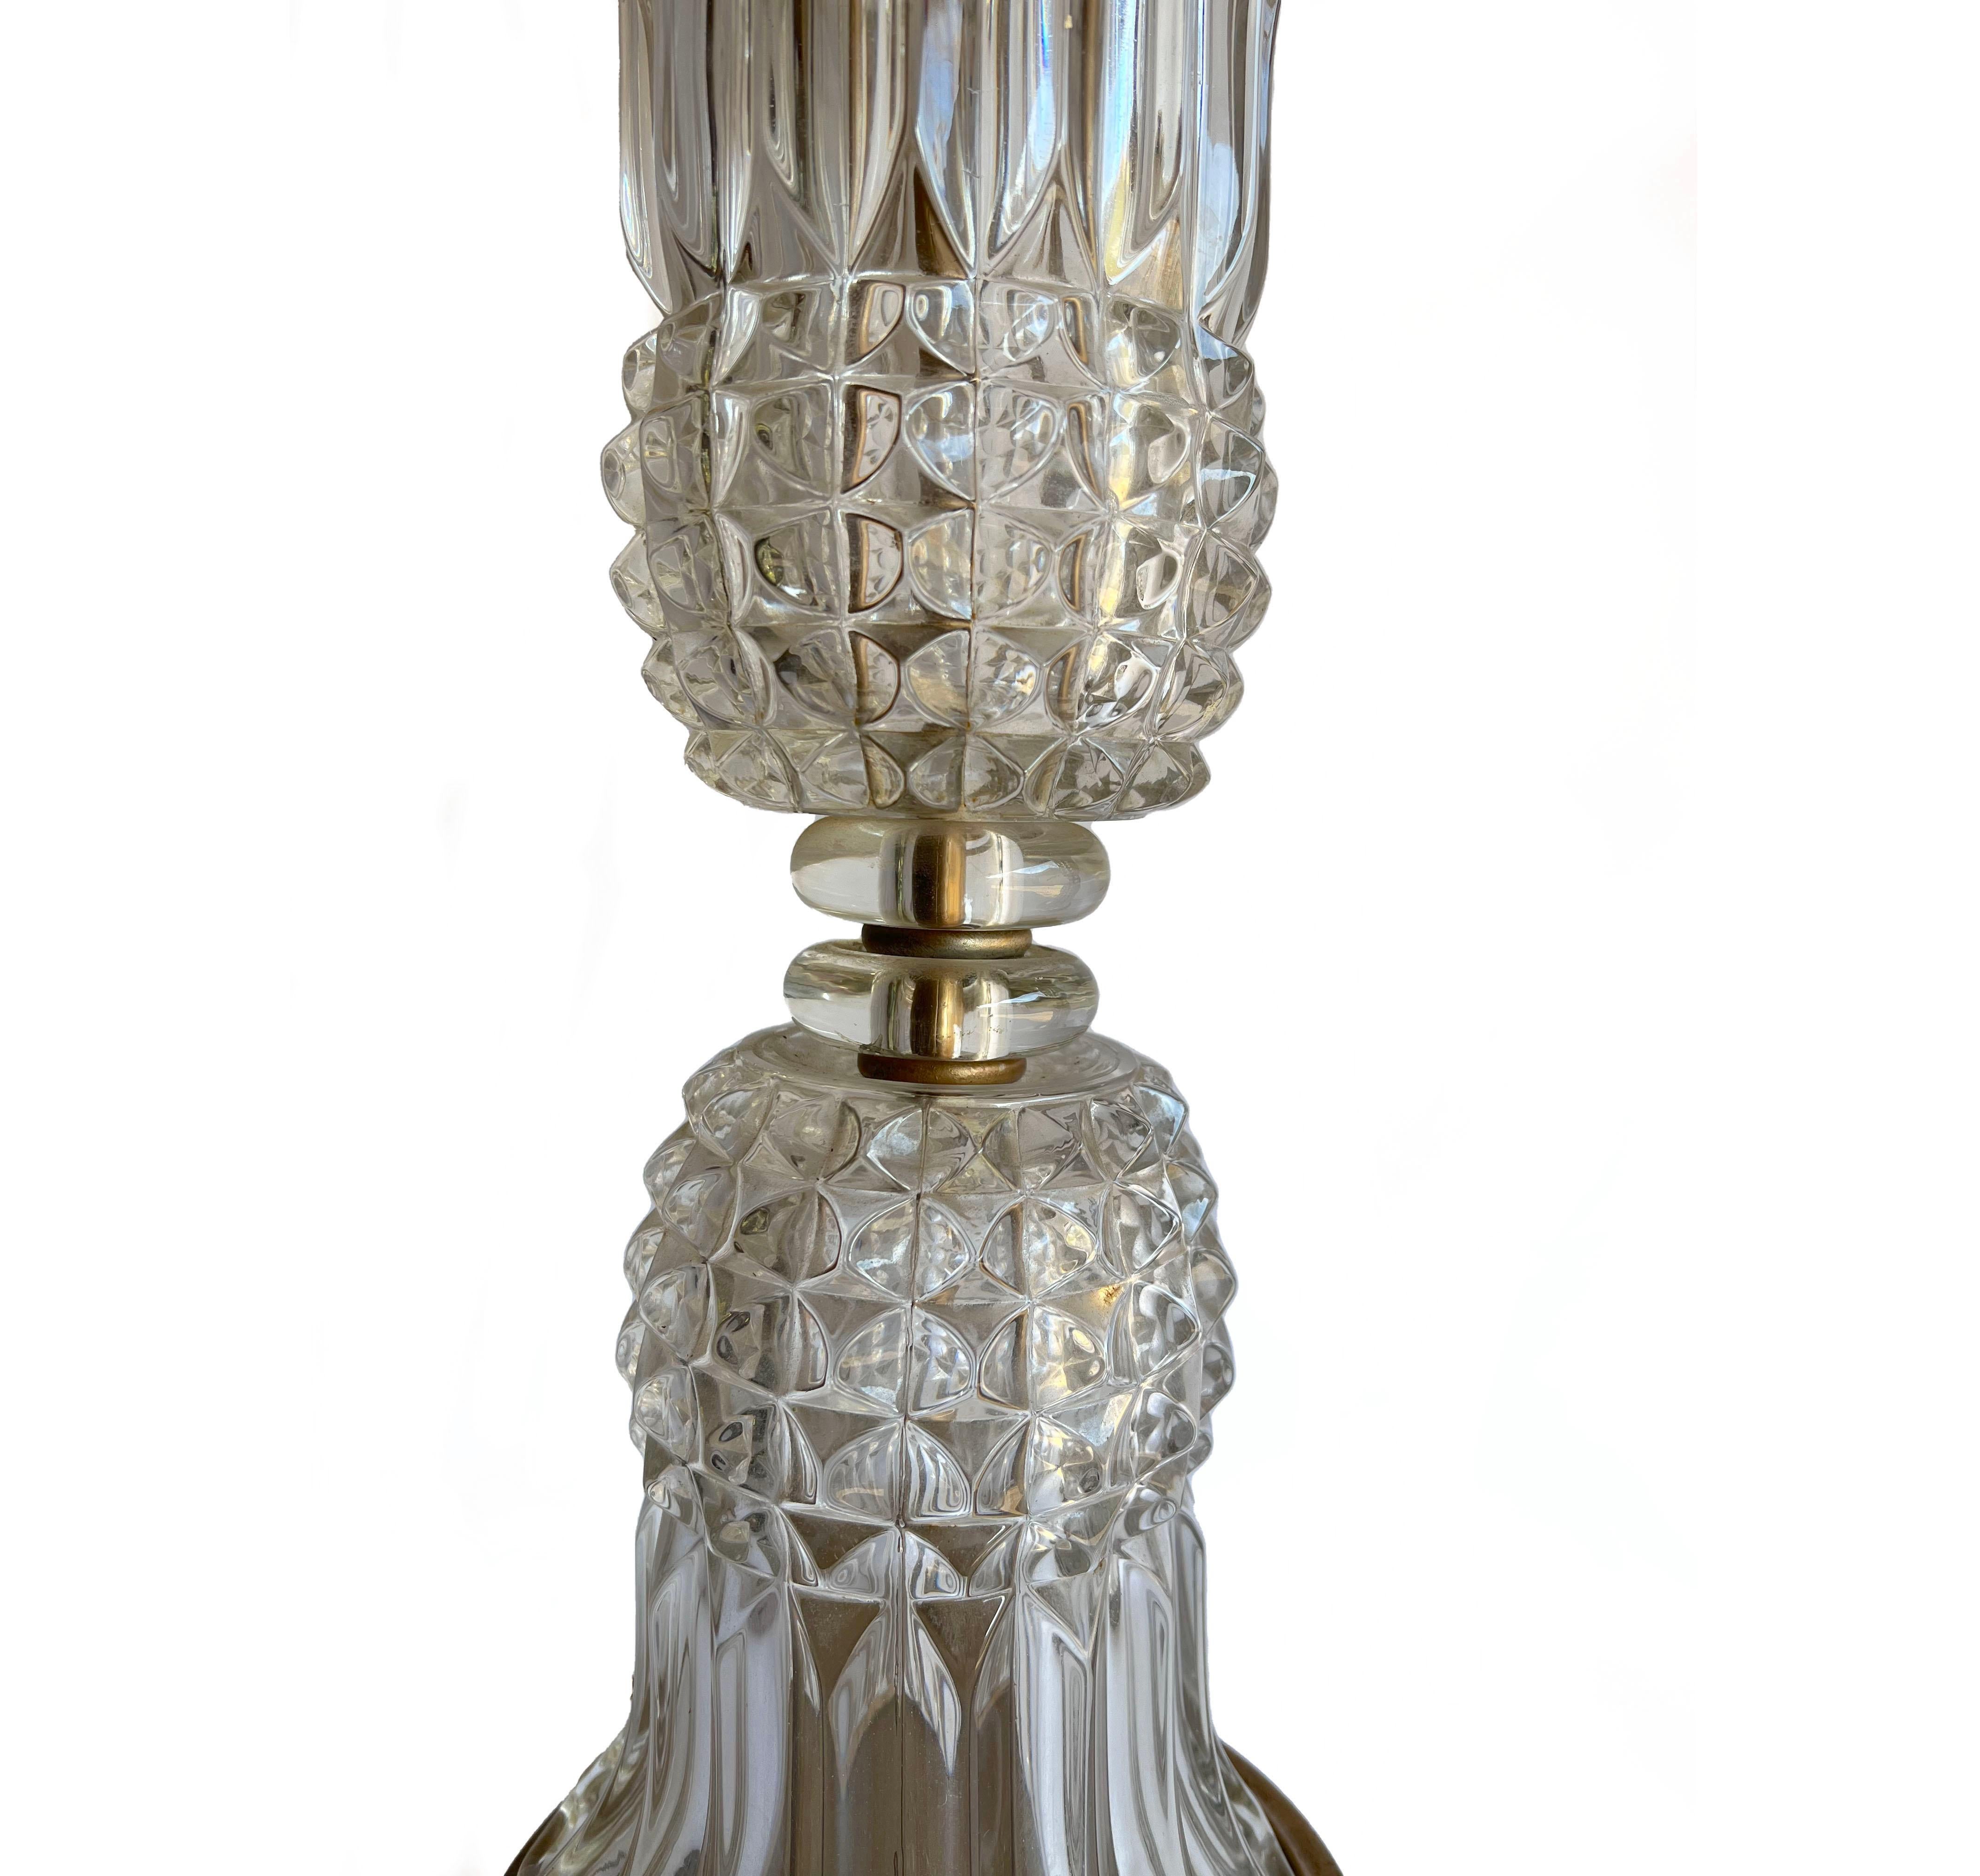 Hollywood Regency Pair Baccarat-Style Mid-20th Century Molded Glass Table Lamps for Restoration For Sale